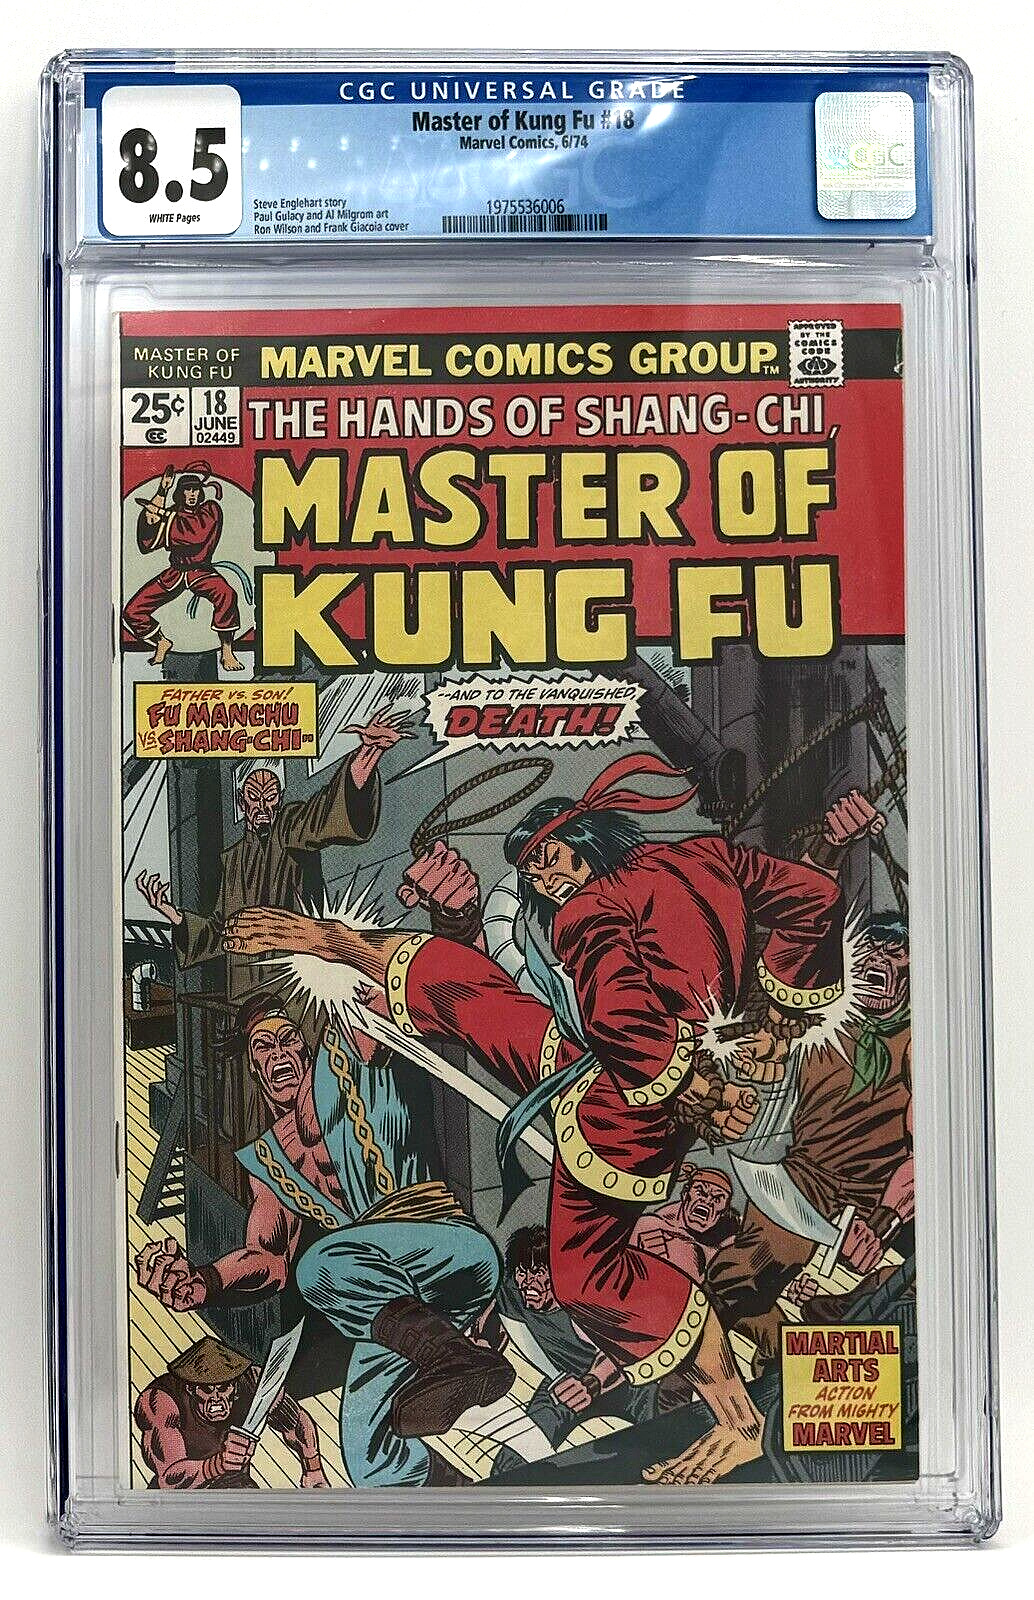 Master of Kung Fu #18 CGC 8.5, high grade with white pages, a Bronze Age Badass